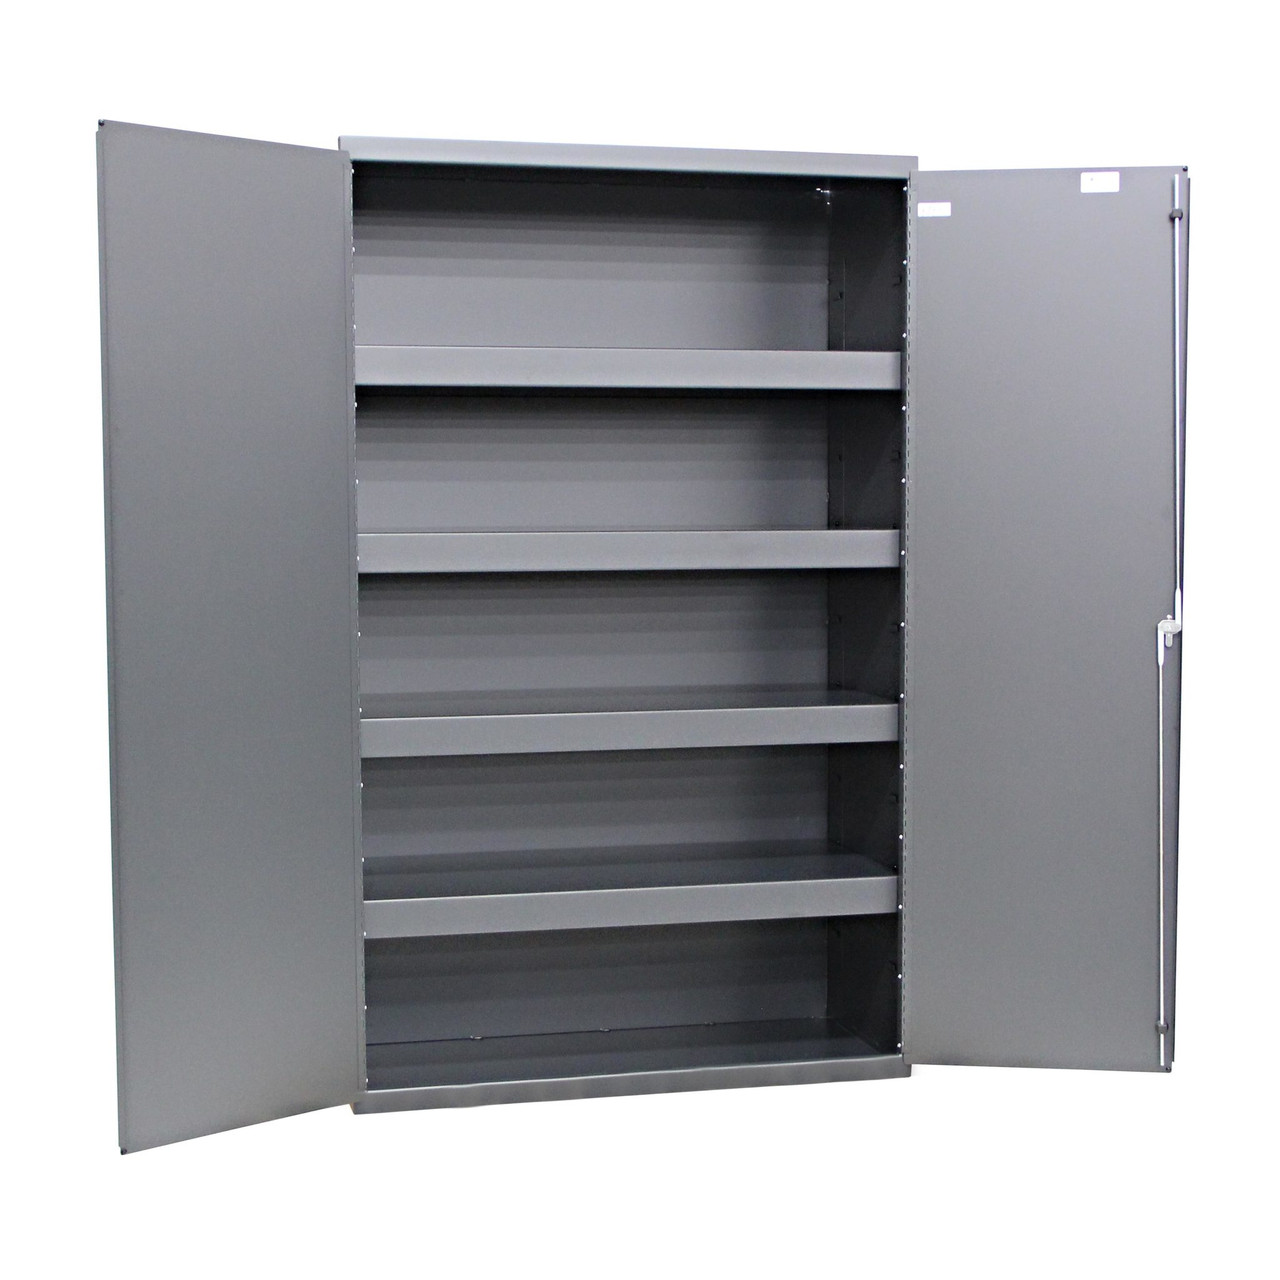 Valley Craft Heavy Duty Steel Cabinet 48 x 24 x 84", Smoke Gray(CALL FOR BEST PRICING)